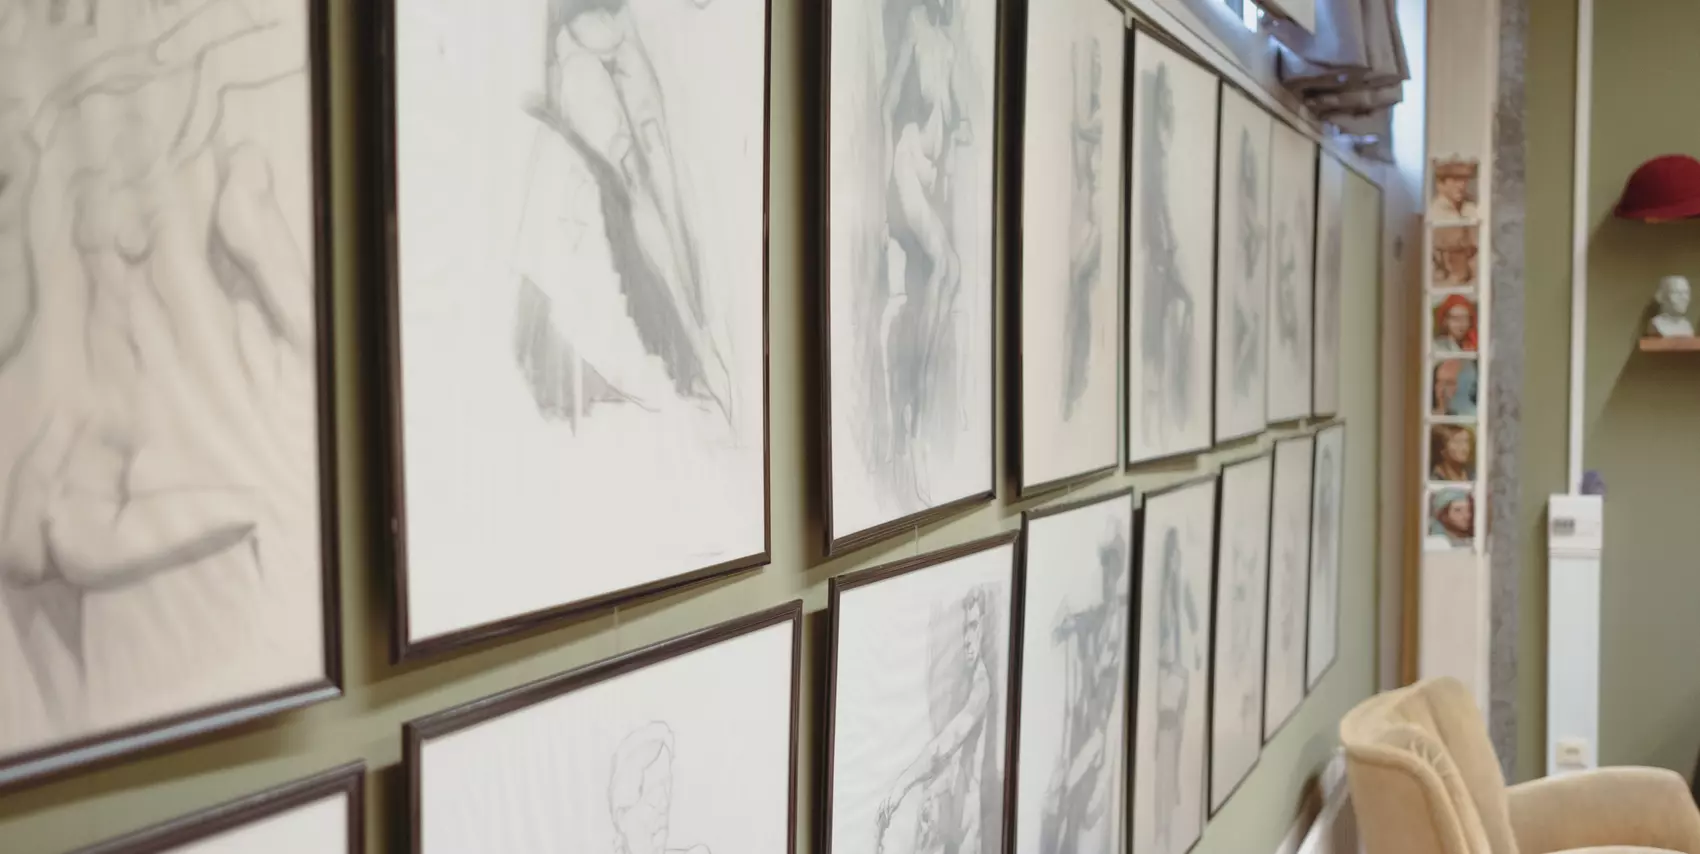 Charcoal drawings at the atelier